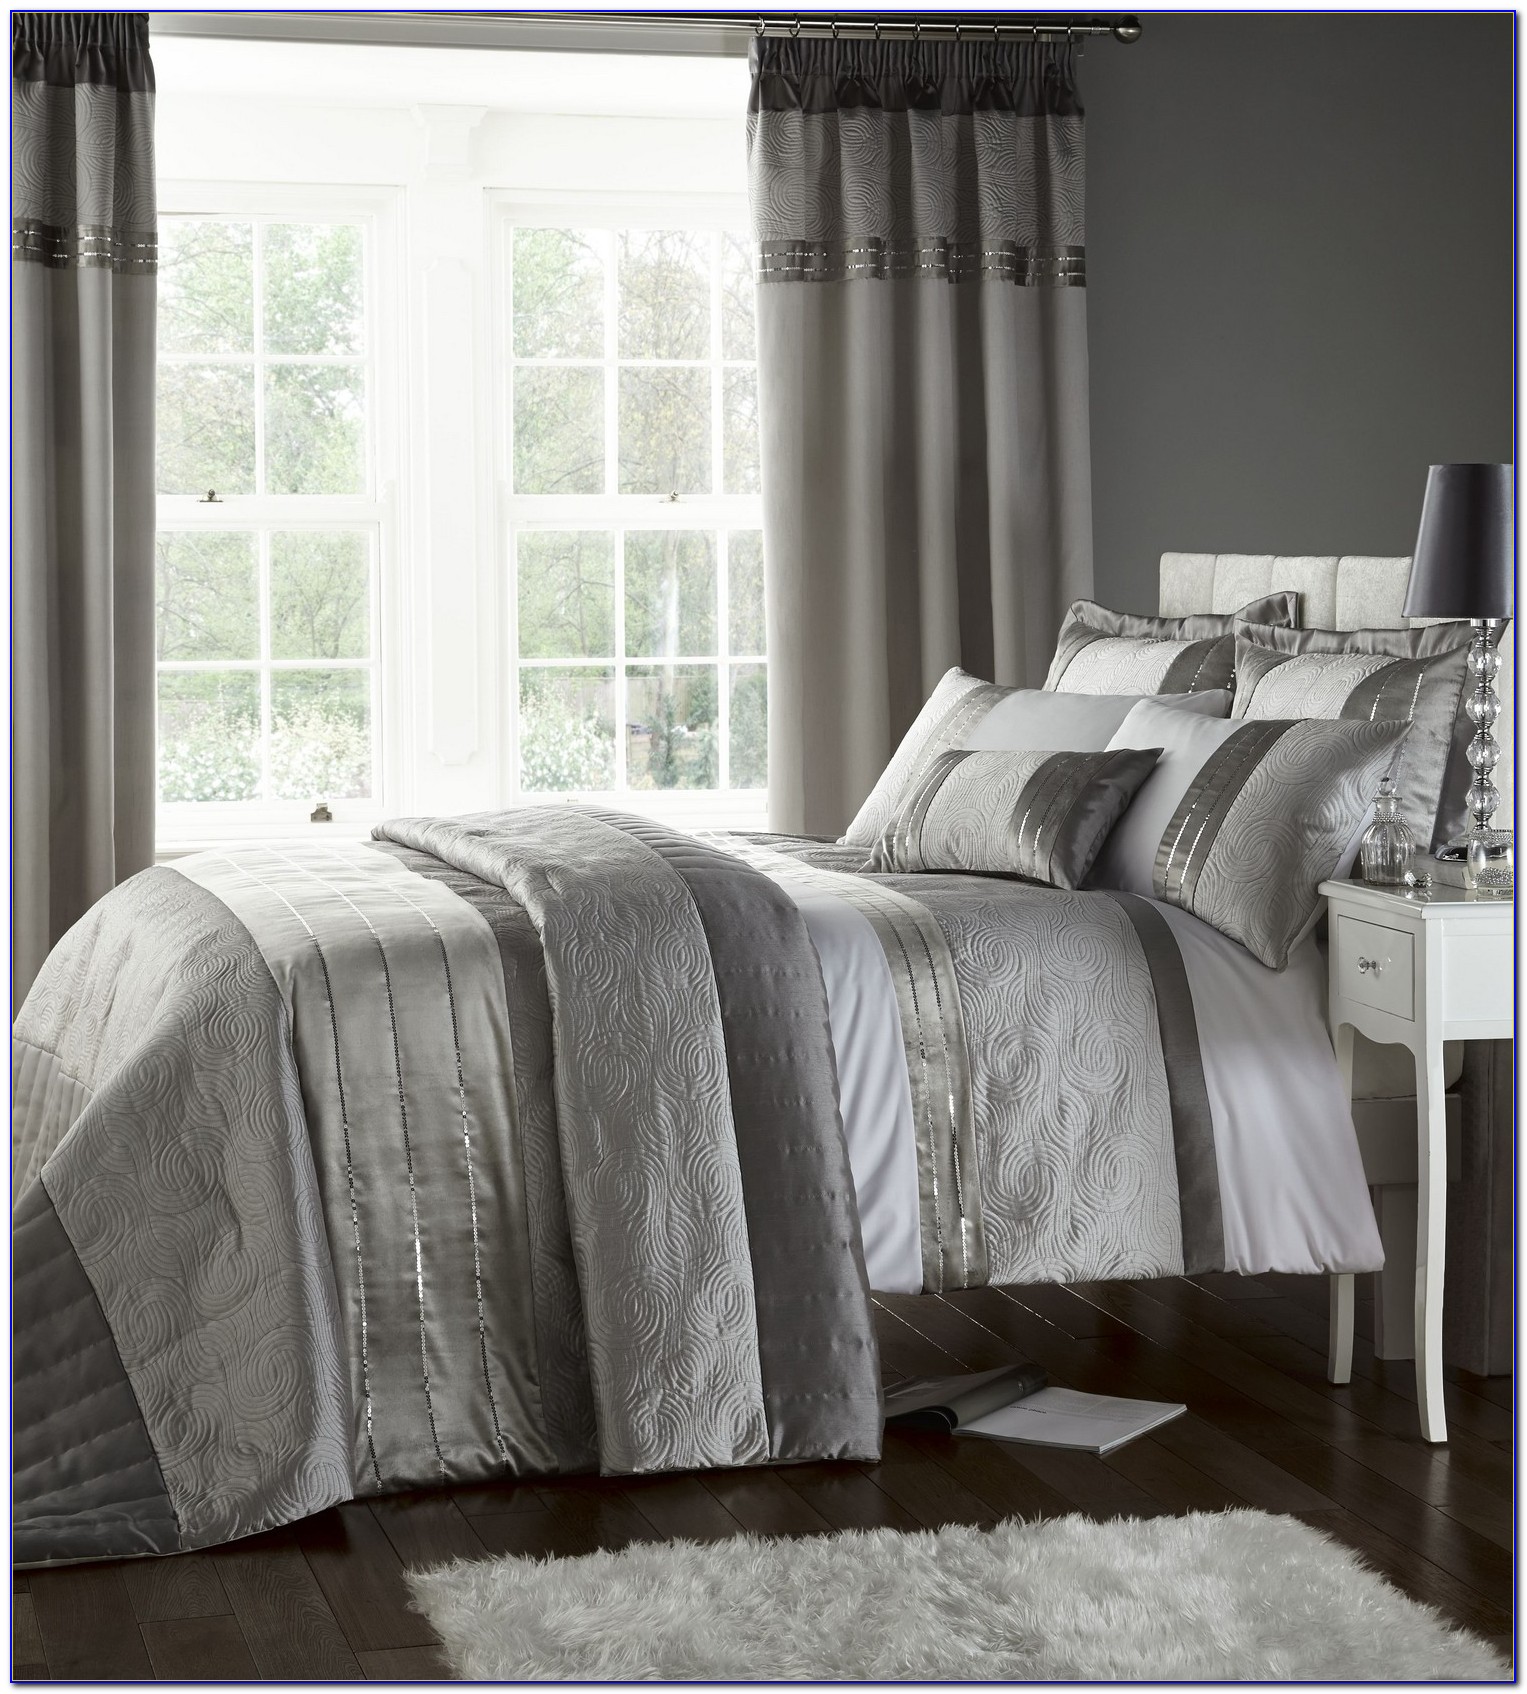 Master Bedroom Bedding And Curtains